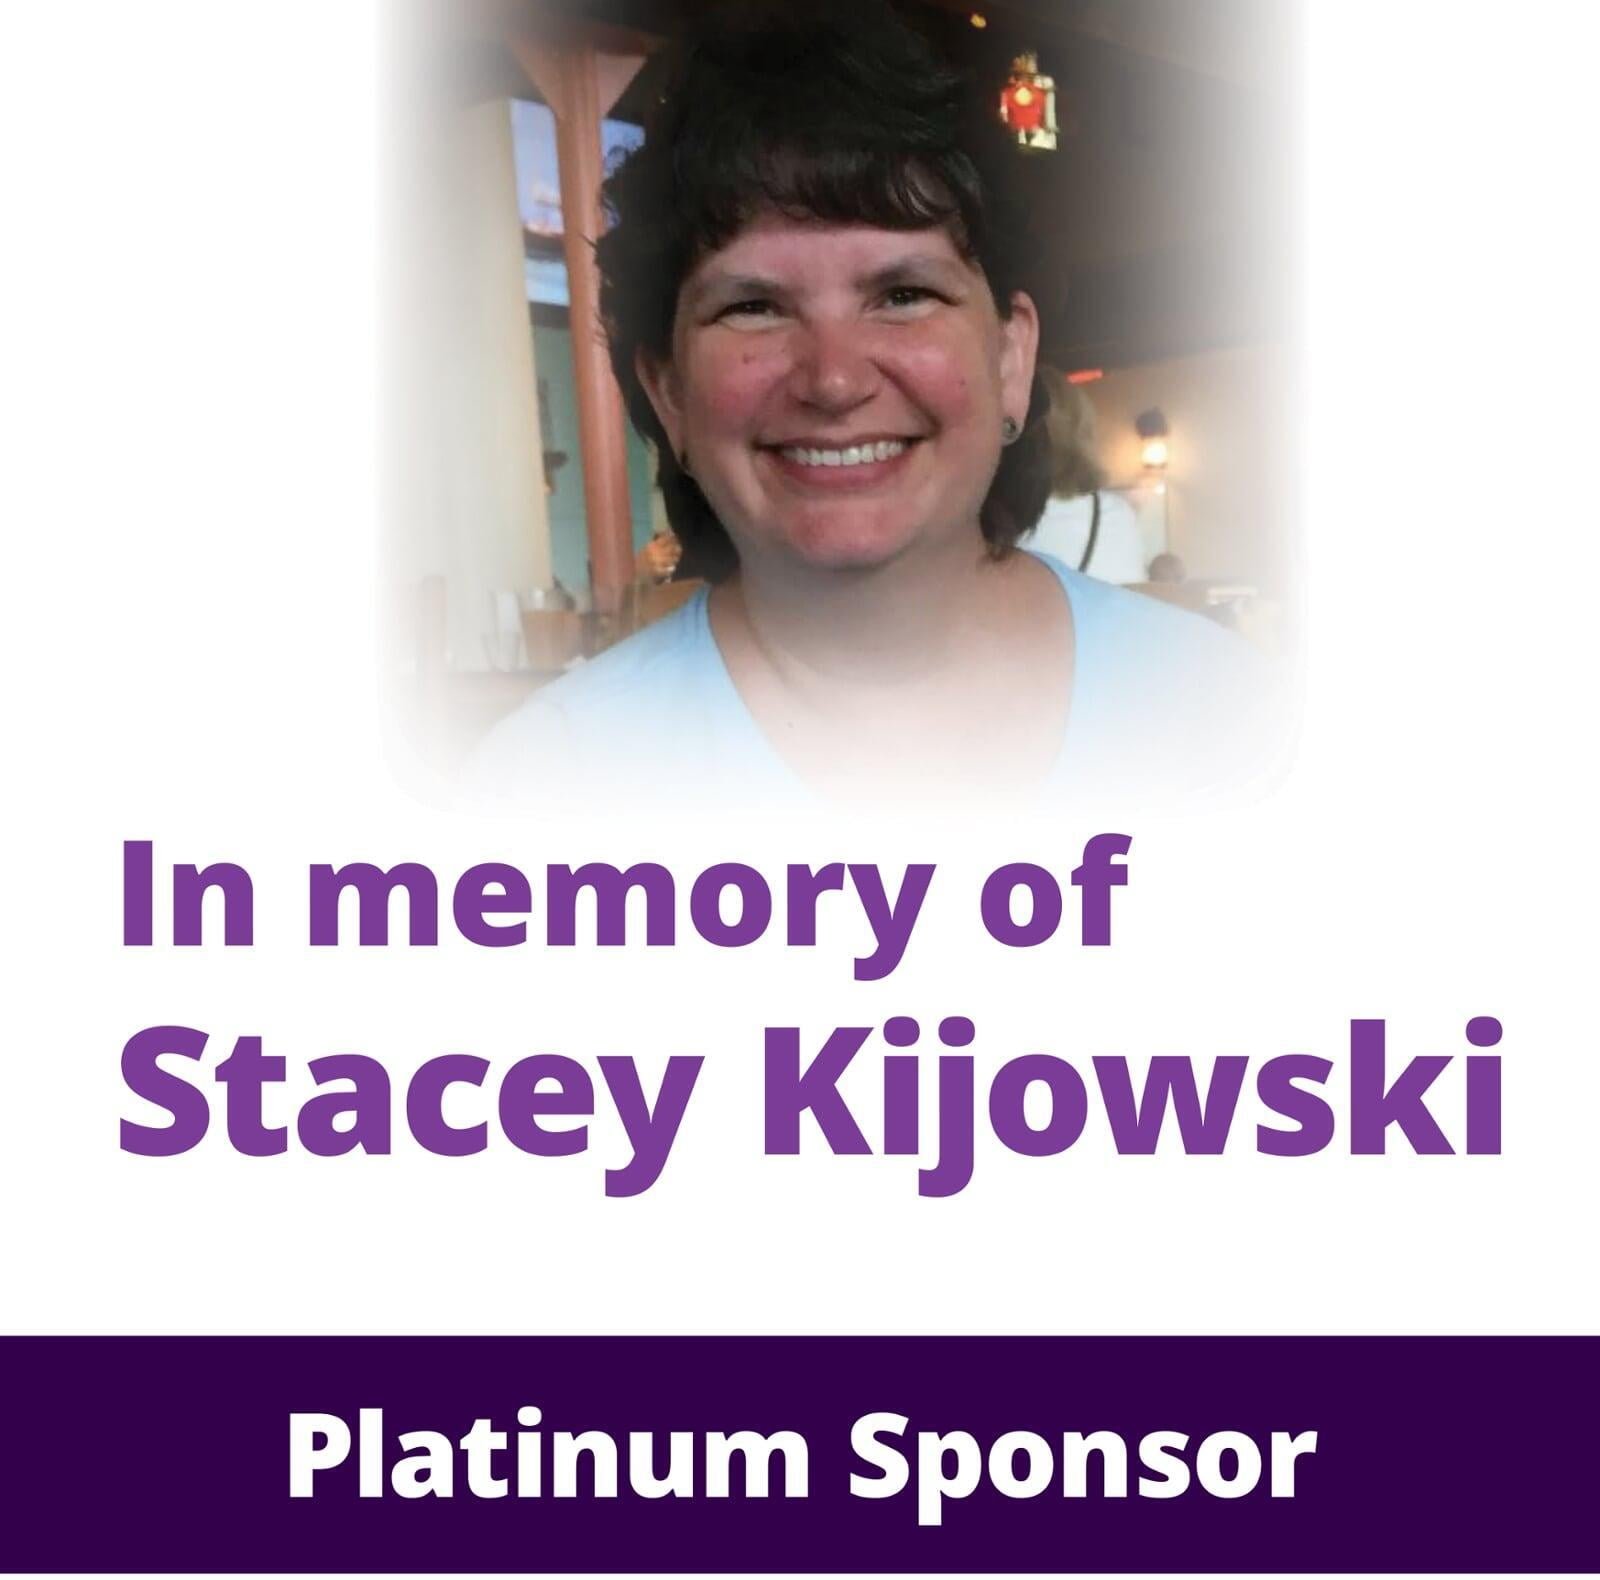 In memory of Stacey Kijowski with a photo of Stacey.